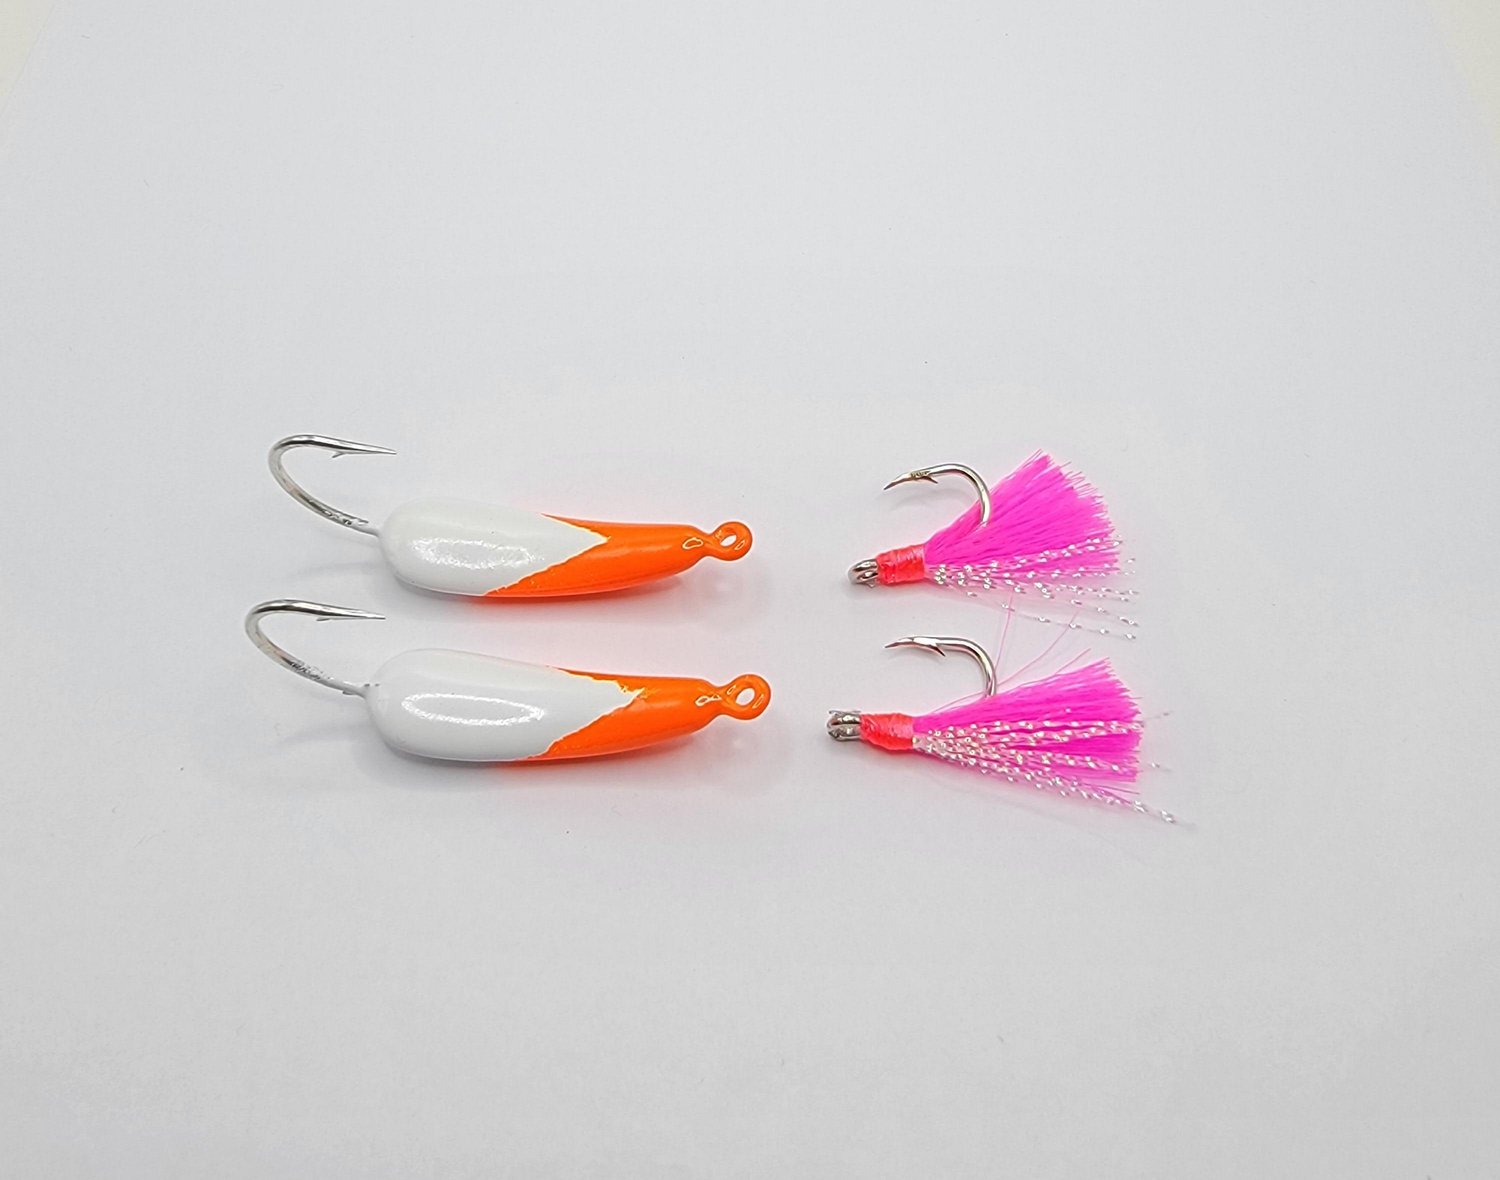 Fishing Lures at Beach Bum Outdoors